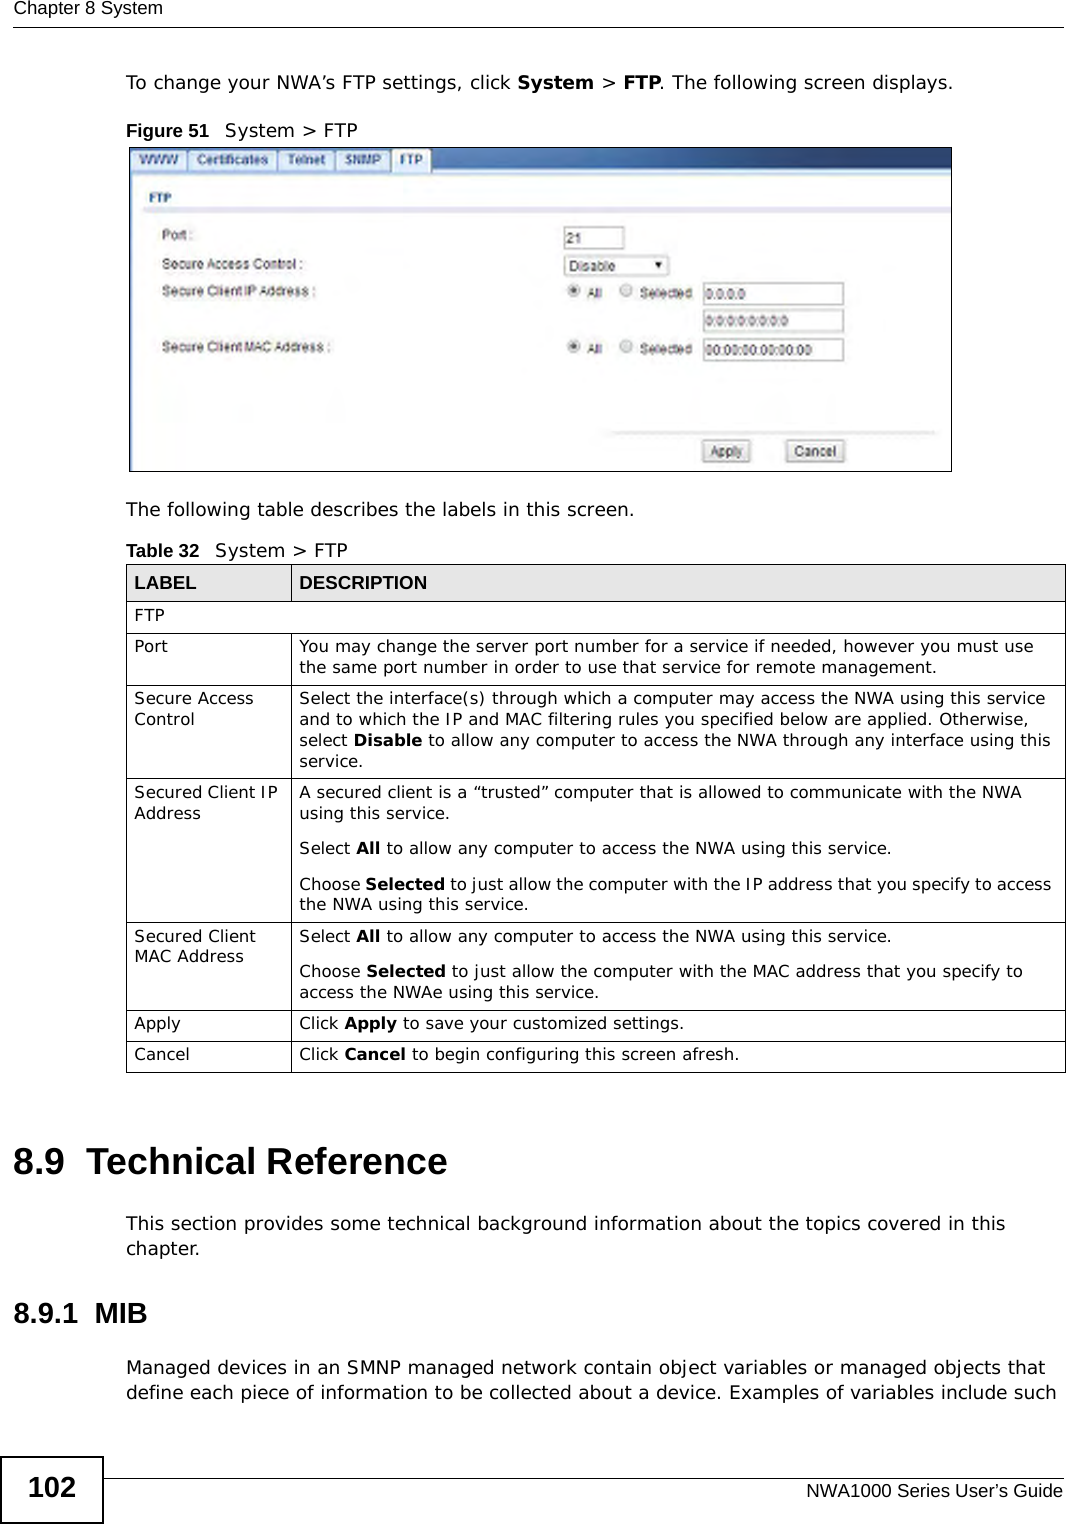 Chapter 8 SystemNWA1000 Series User’s Guide102To change your NWA’s FTP settings, click System &gt; FTP. The following screen displays.Figure 51   System &gt; FTPThe following table describes the labels in this screen.8.9  Technical ReferenceThis section provides some technical background information about the topics covered in this chapter. 8.9.1  MIBManaged devices in an SMNP managed network contain object variables or managed objects that define each piece of information to be collected about a device. Examples of variables include such Table 32   System &gt; FTPLABEL DESCRIPTIONFTPPort You may change the server port number for a service if needed, however you must use the same port number in order to use that service for remote management.Secure Access Control Select the interface(s) through which a computer may access the NWA using this service and to which the IP and MAC filtering rules you specified below are applied. Otherwise, select Disable to allow any computer to access the NWA through any interface using this service.Secured Client IP Address A secured client is a “trusted” computer that is allowed to communicate with the NWA using this service. Select All to allow any computer to access the NWA using this service.Choose Selected to just allow the computer with the IP address that you specify to access the NWA using this service.Secured Client MAC Address Select All to allow any computer to access the NWA using this service.Choose Selected to just allow the computer with the MAC address that you specify to access the NWAe using this service.Apply Click Apply to save your customized settings. Cancel Click Cancel to begin configuring this screen afresh.